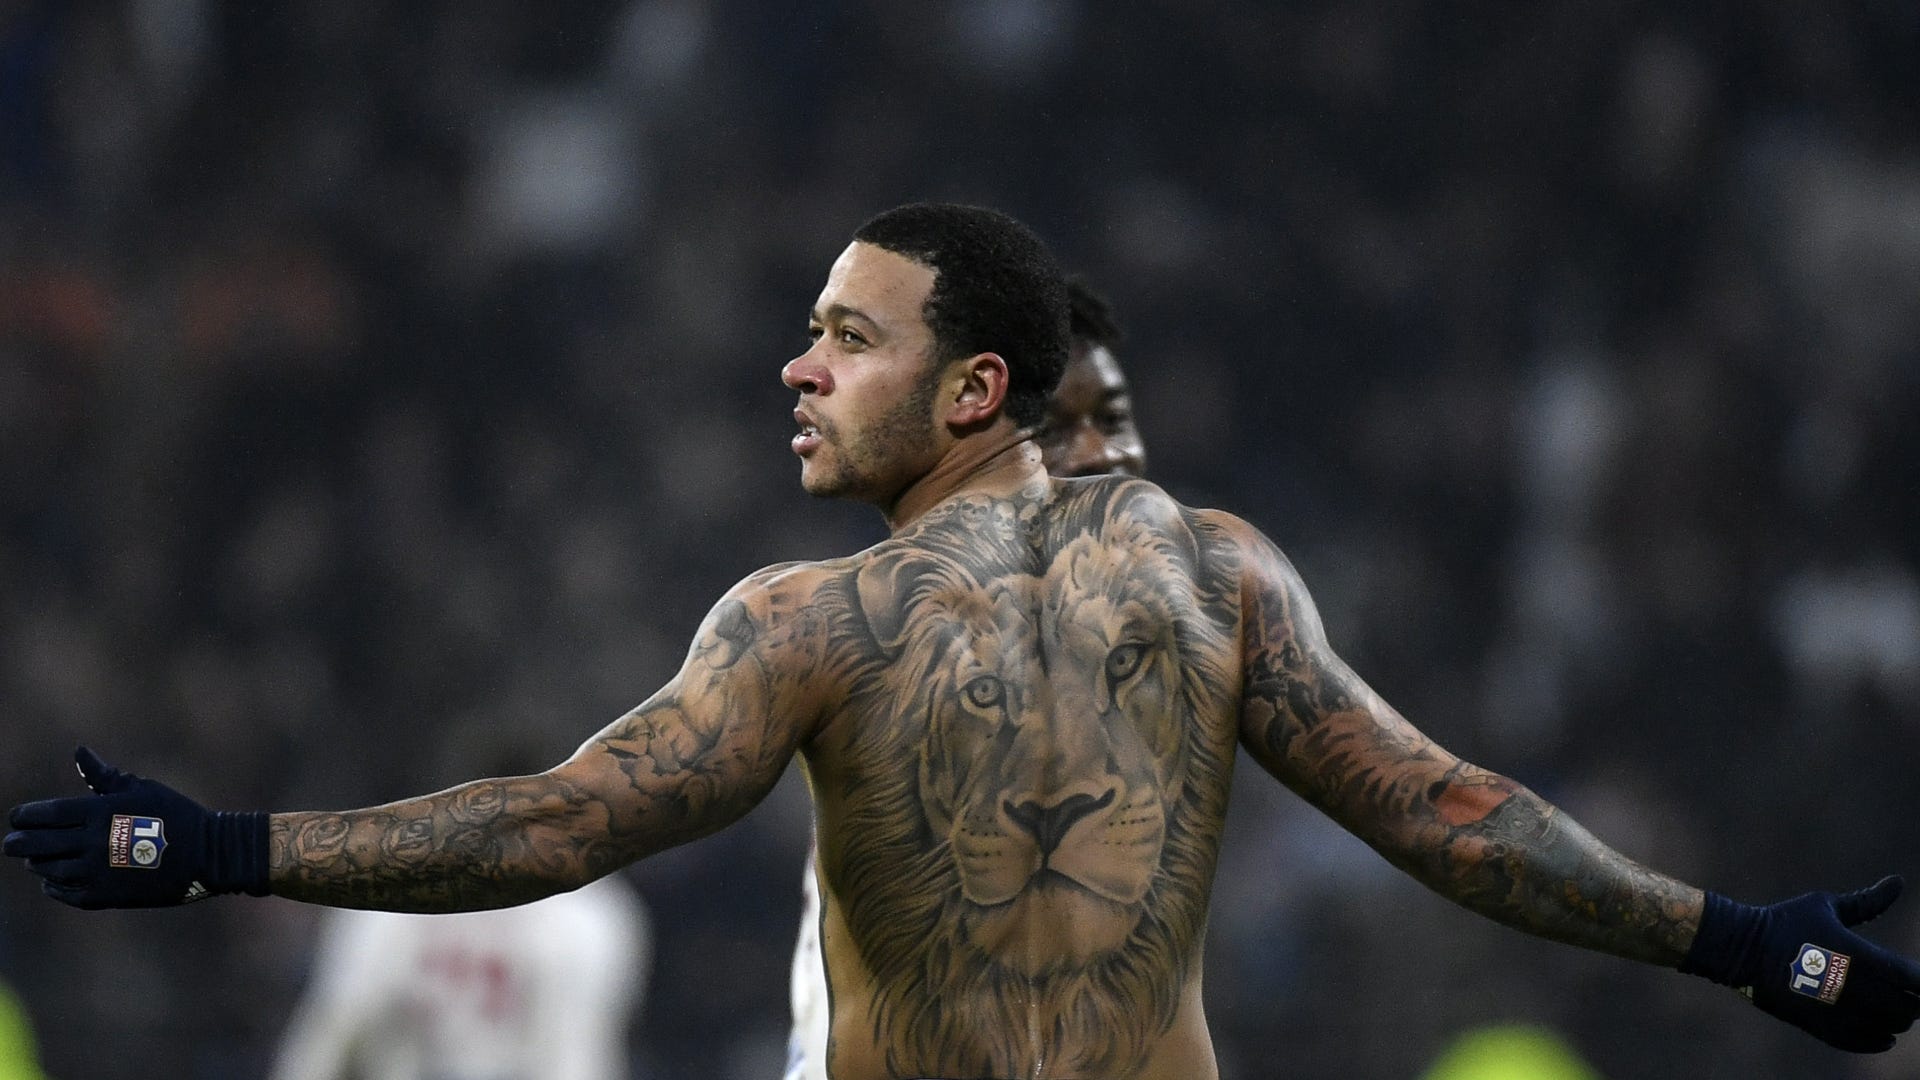 The reason of the curious celebration of Memphis Depay